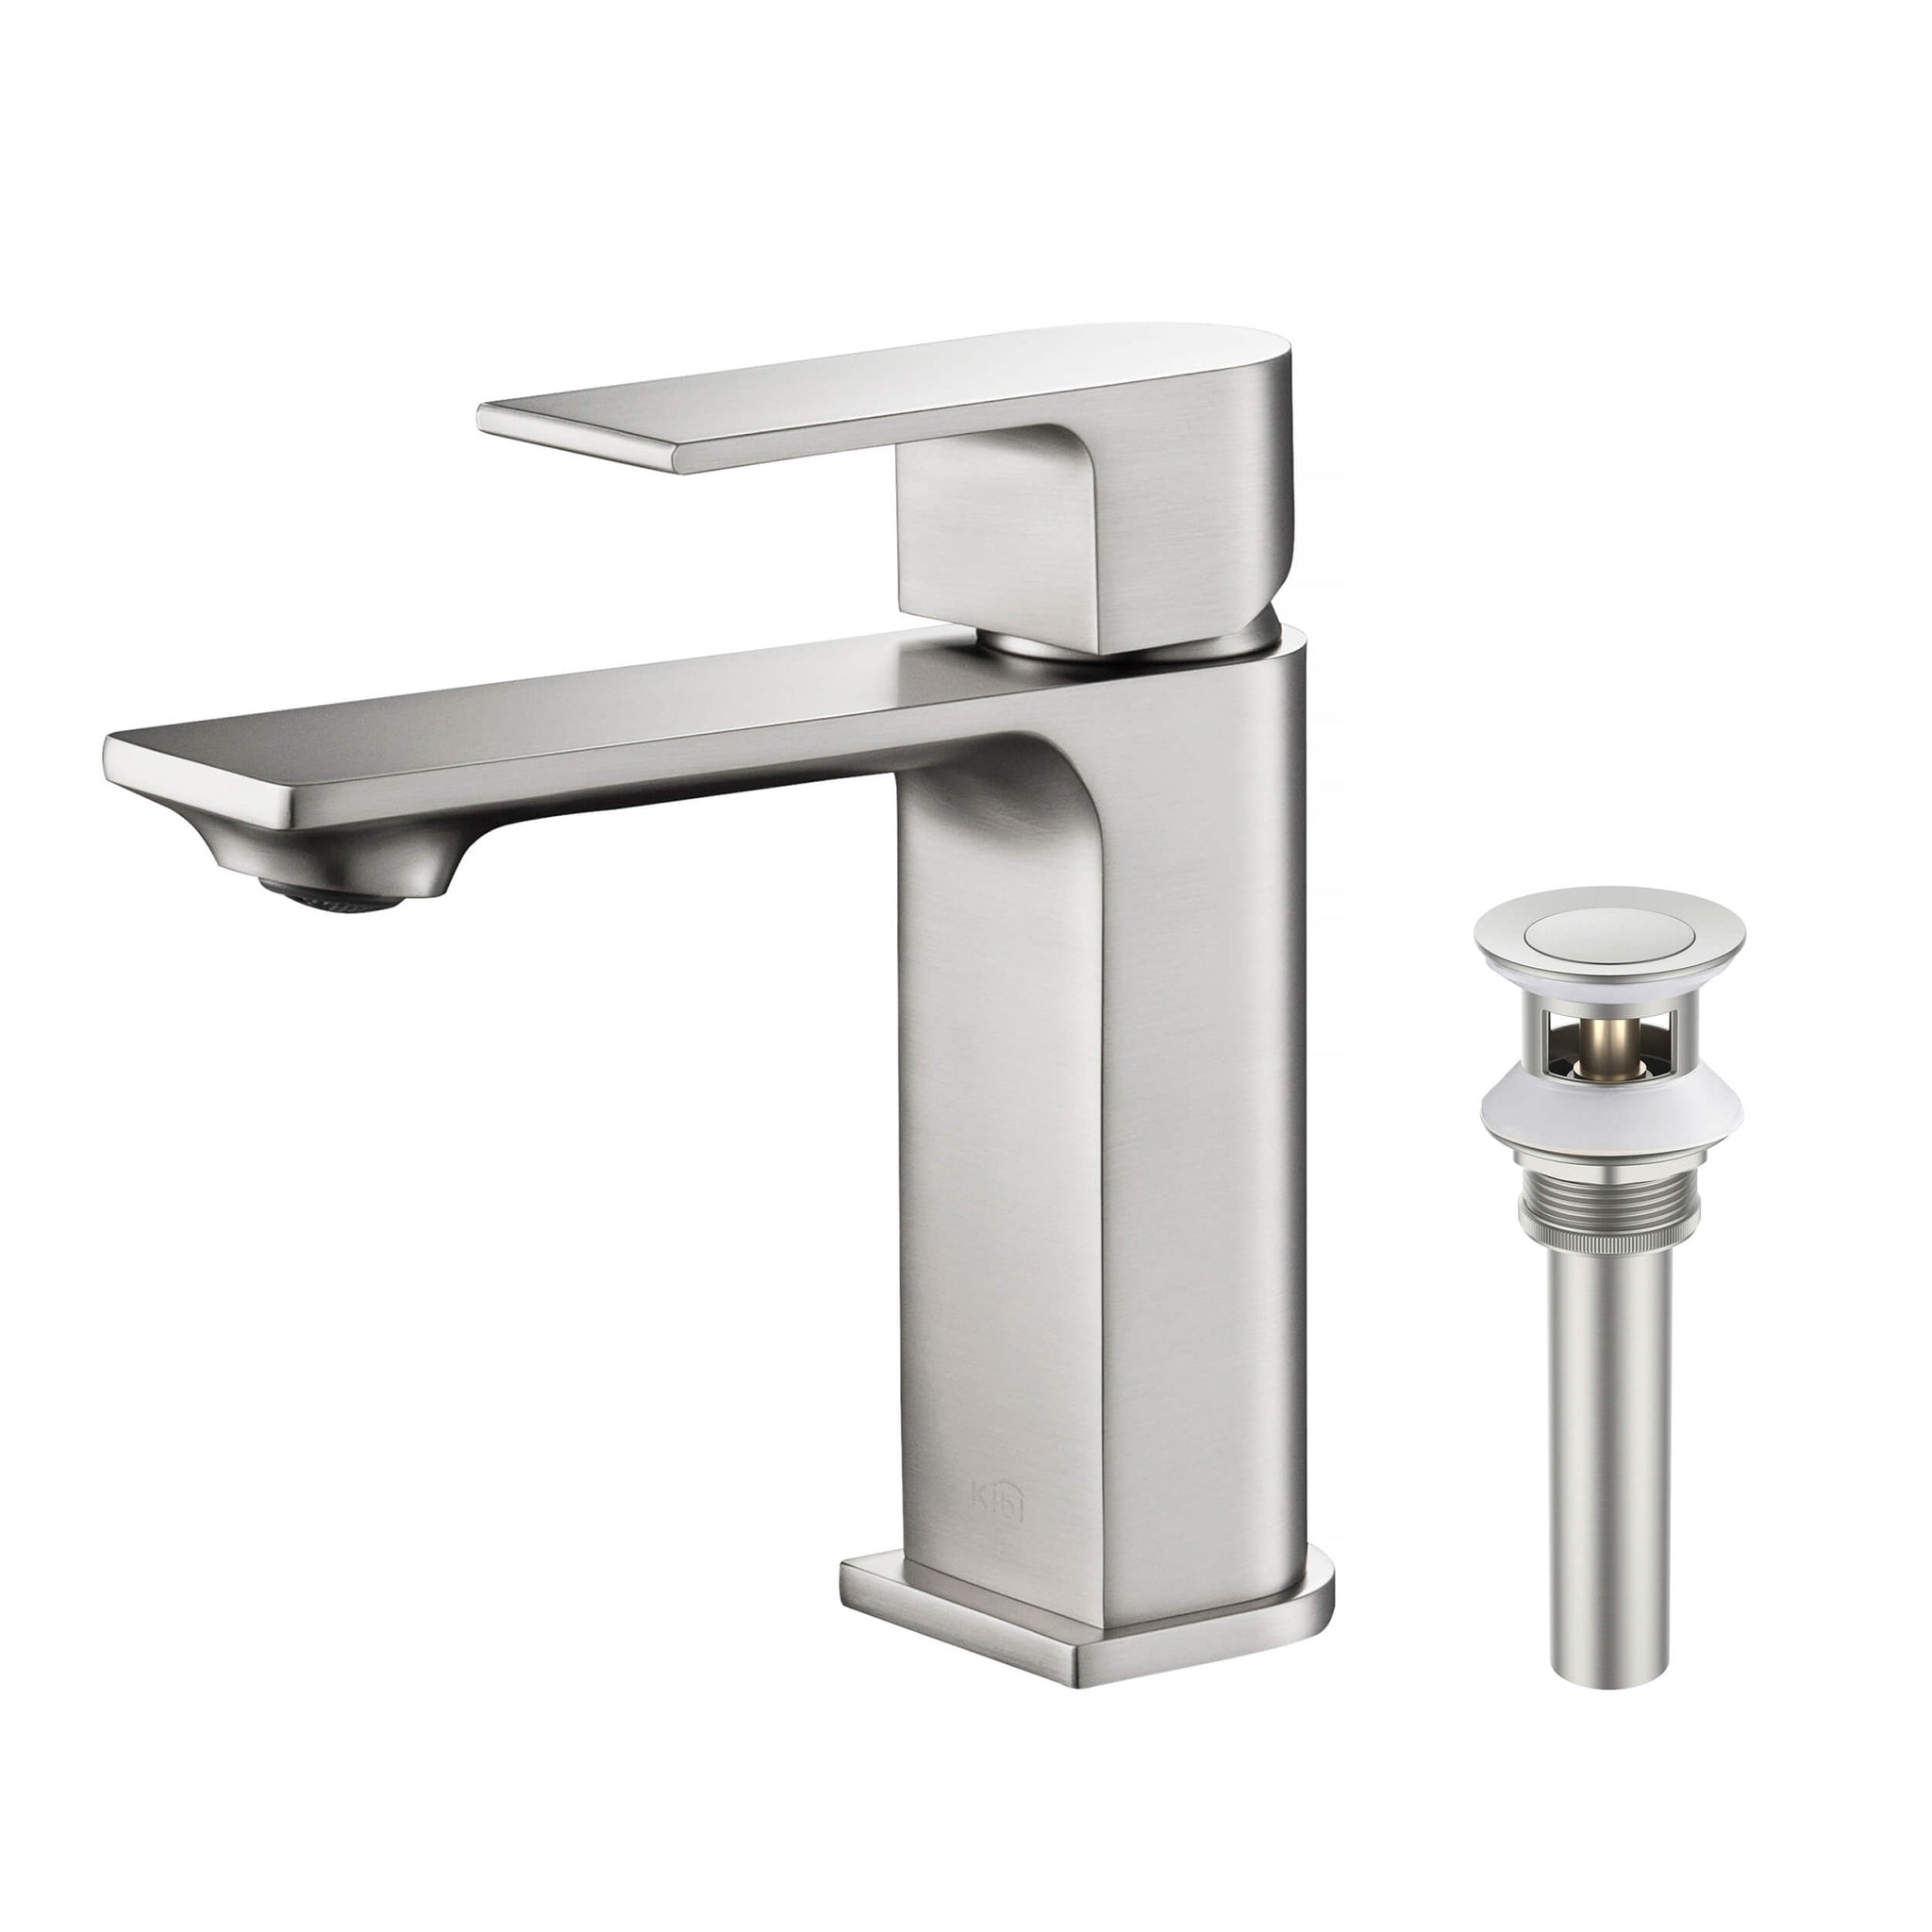 KIBI, KIBI Mirage Single Handle Brushed Nickel Solid Brass Bathroom Vanity Sink Faucet With Pop-Up Drain Stopper Small Cover With Overflow